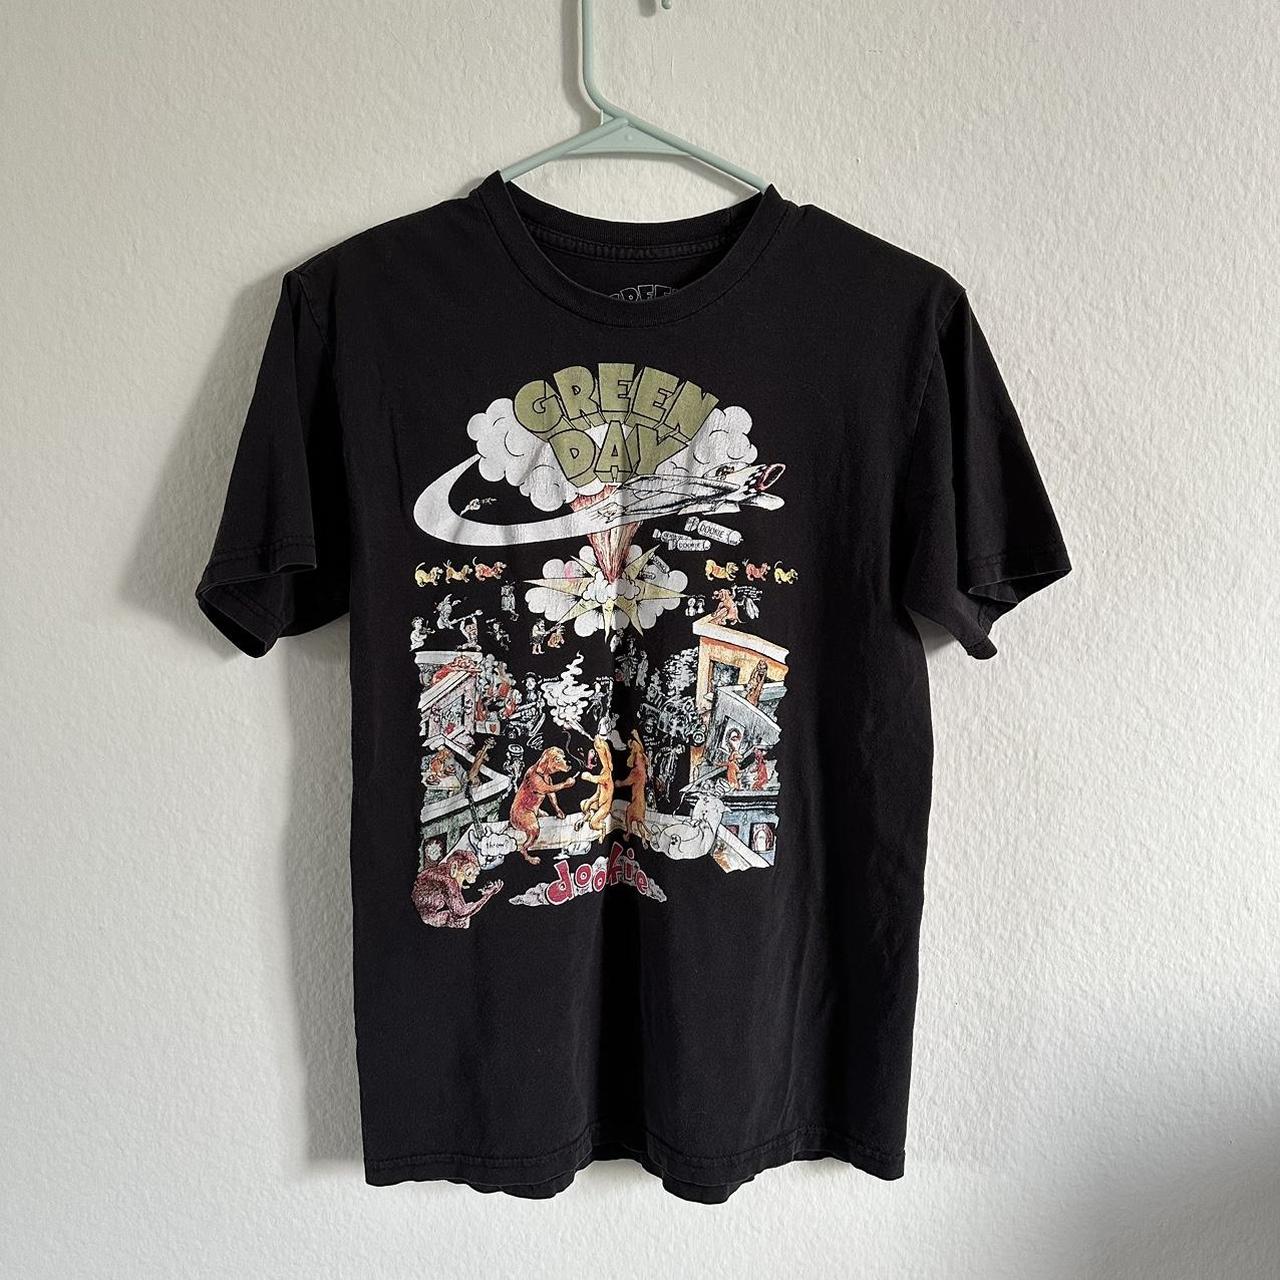 Green Day Dookie Graphic Black Shirt - Small Can... - Depop